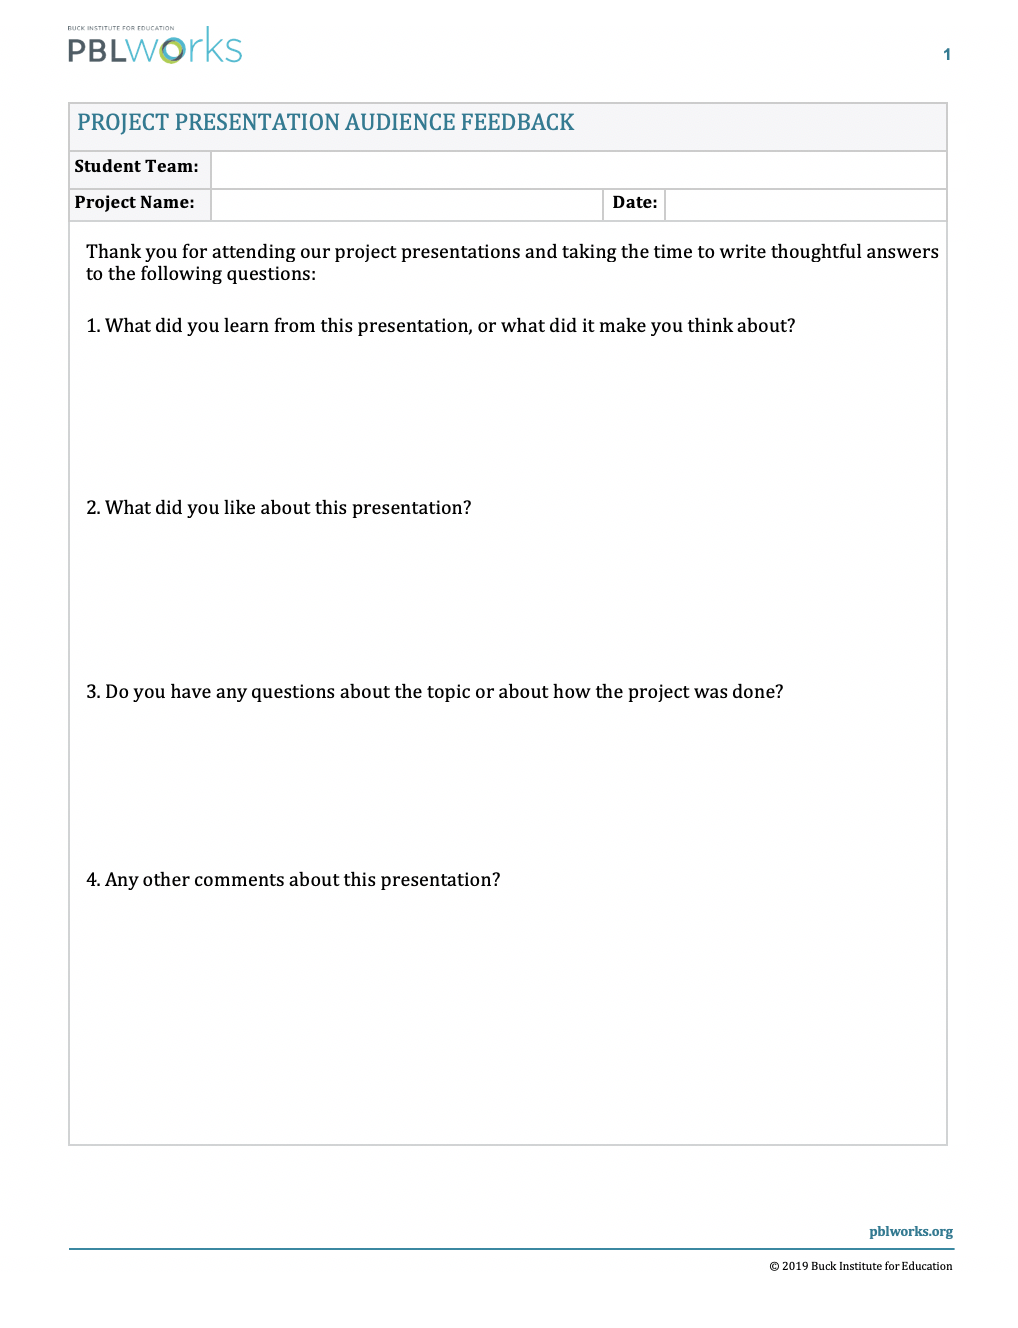 Project Presentation Audience Feedback Form